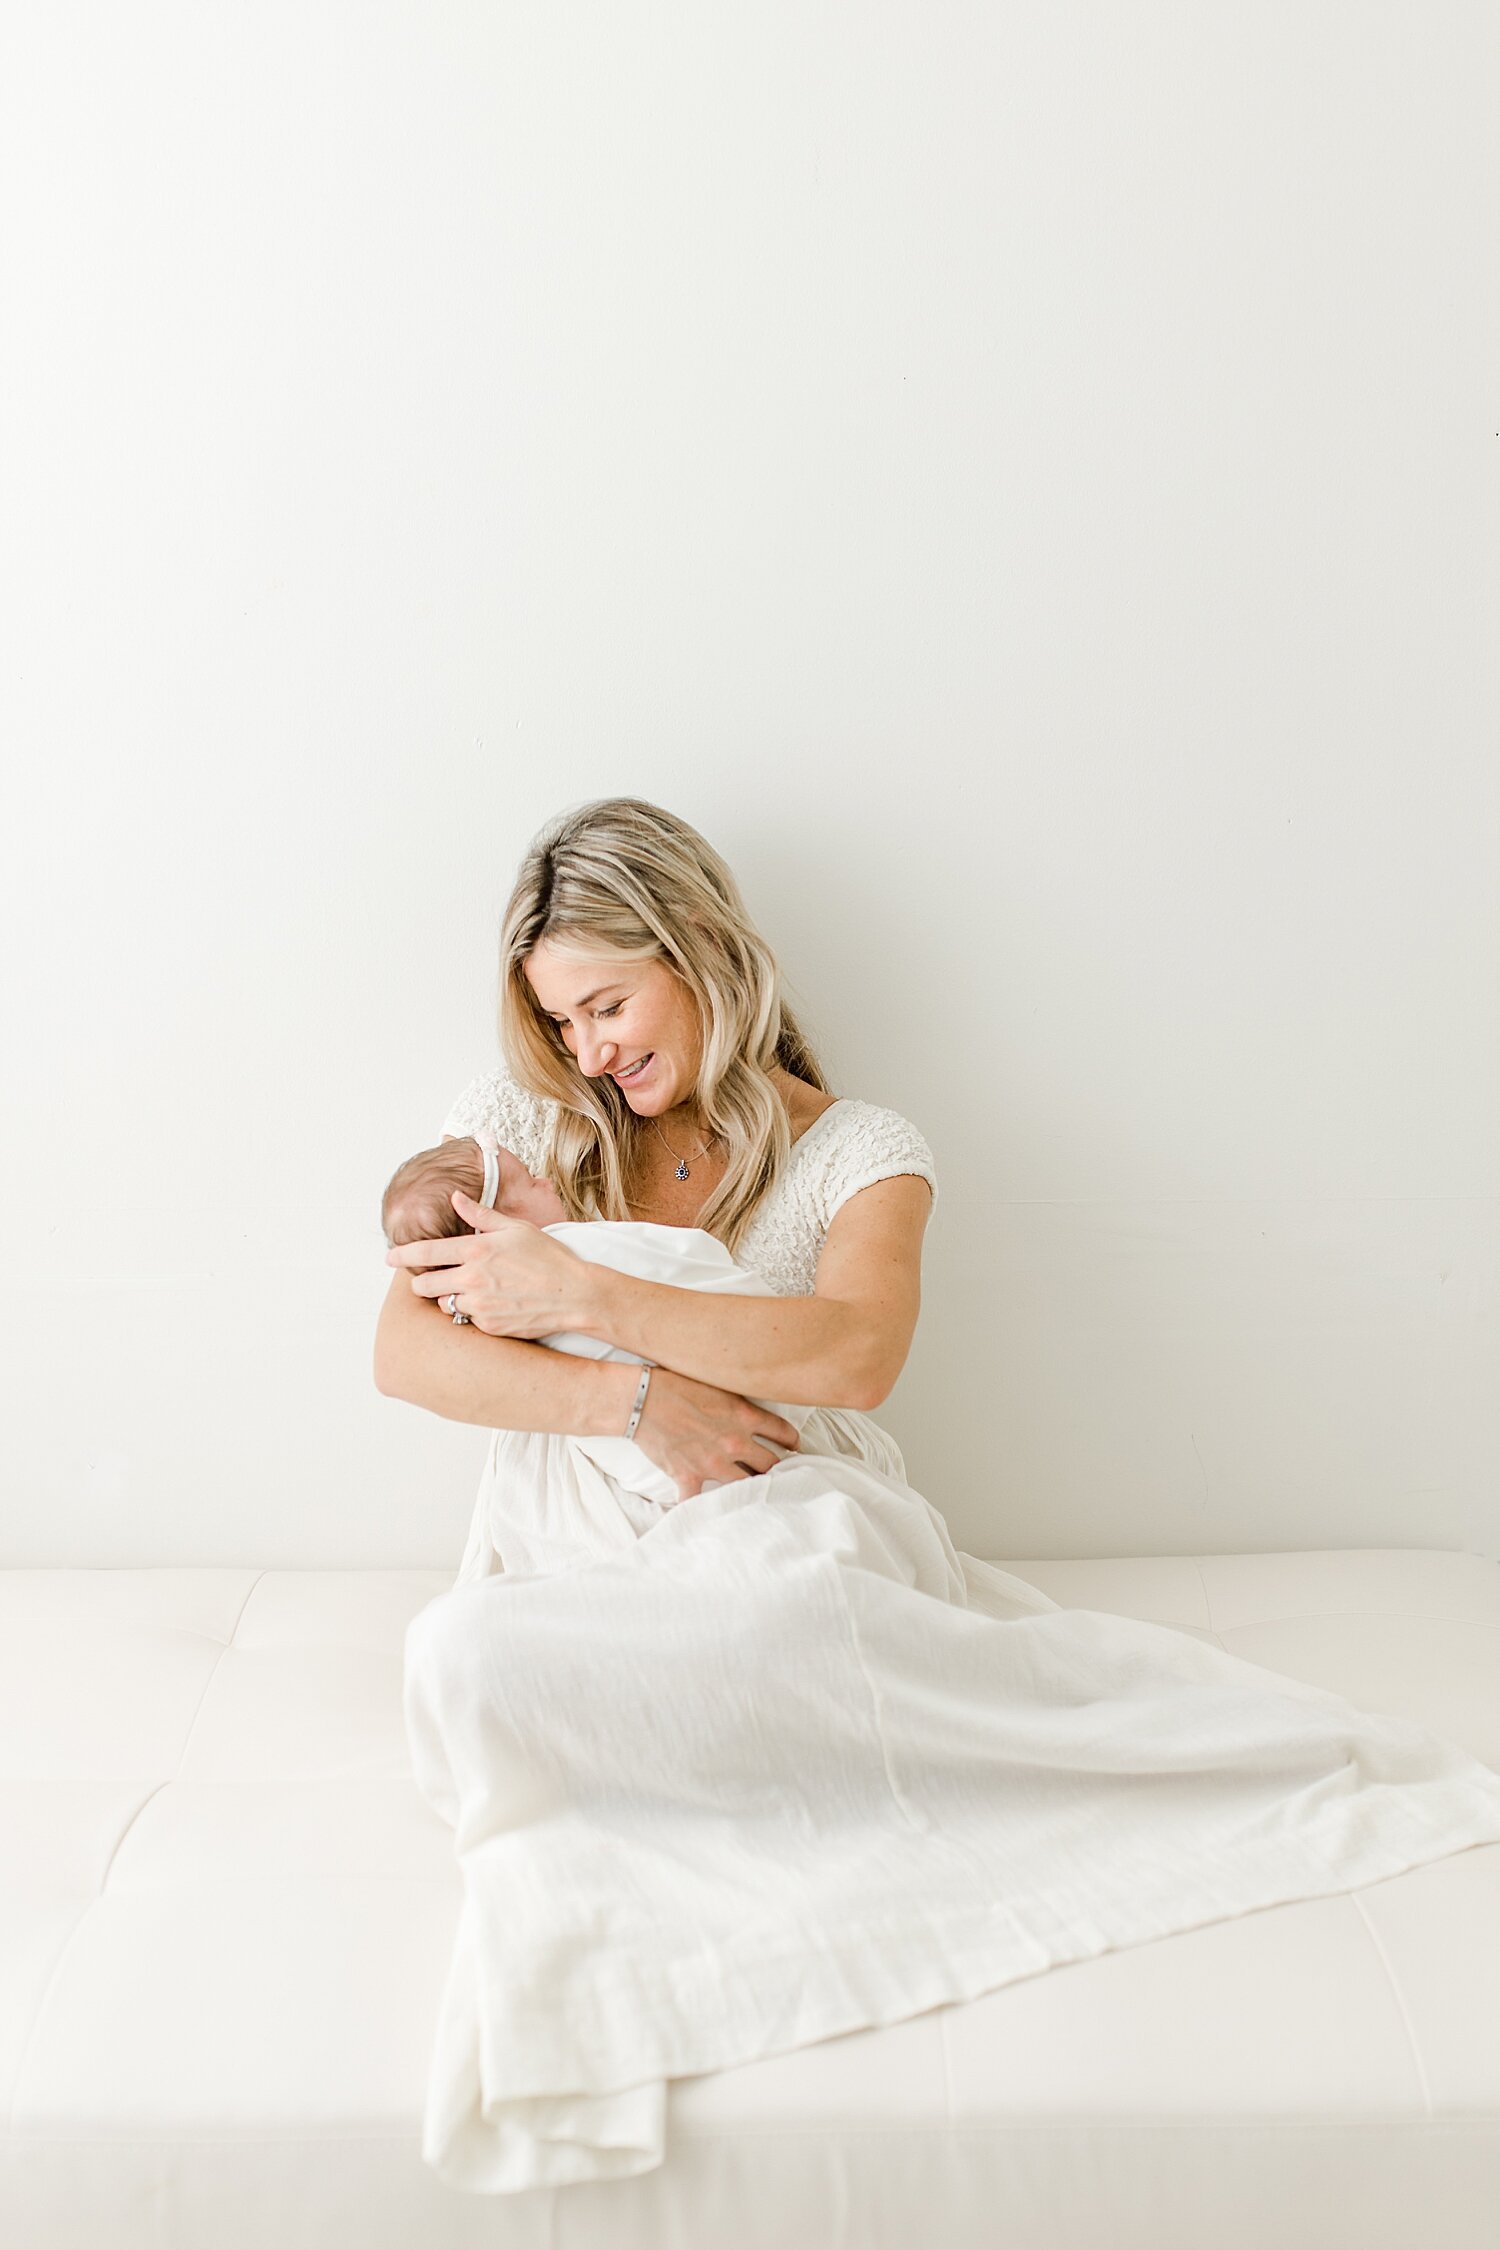 Newborn photographer in Connecticut, Kristin Wood Photography, takes photos of Mom, Dad and newborn baby girl. 